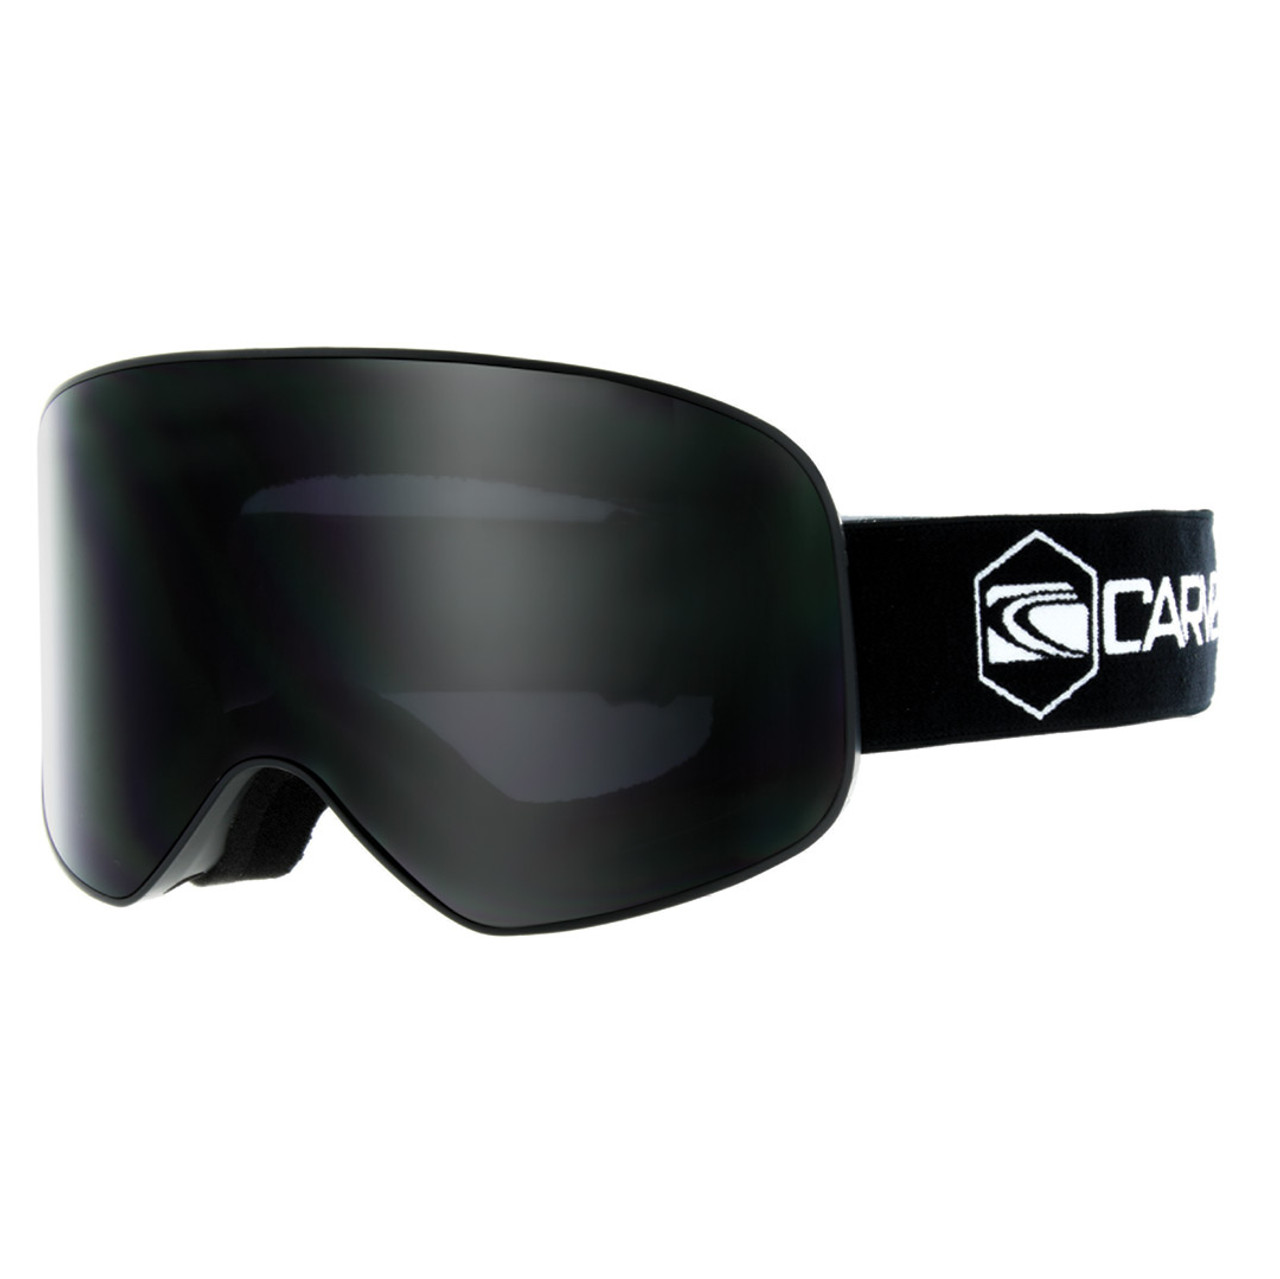 Carve Frother Snow Goggles Matte Black Smoke Onesize